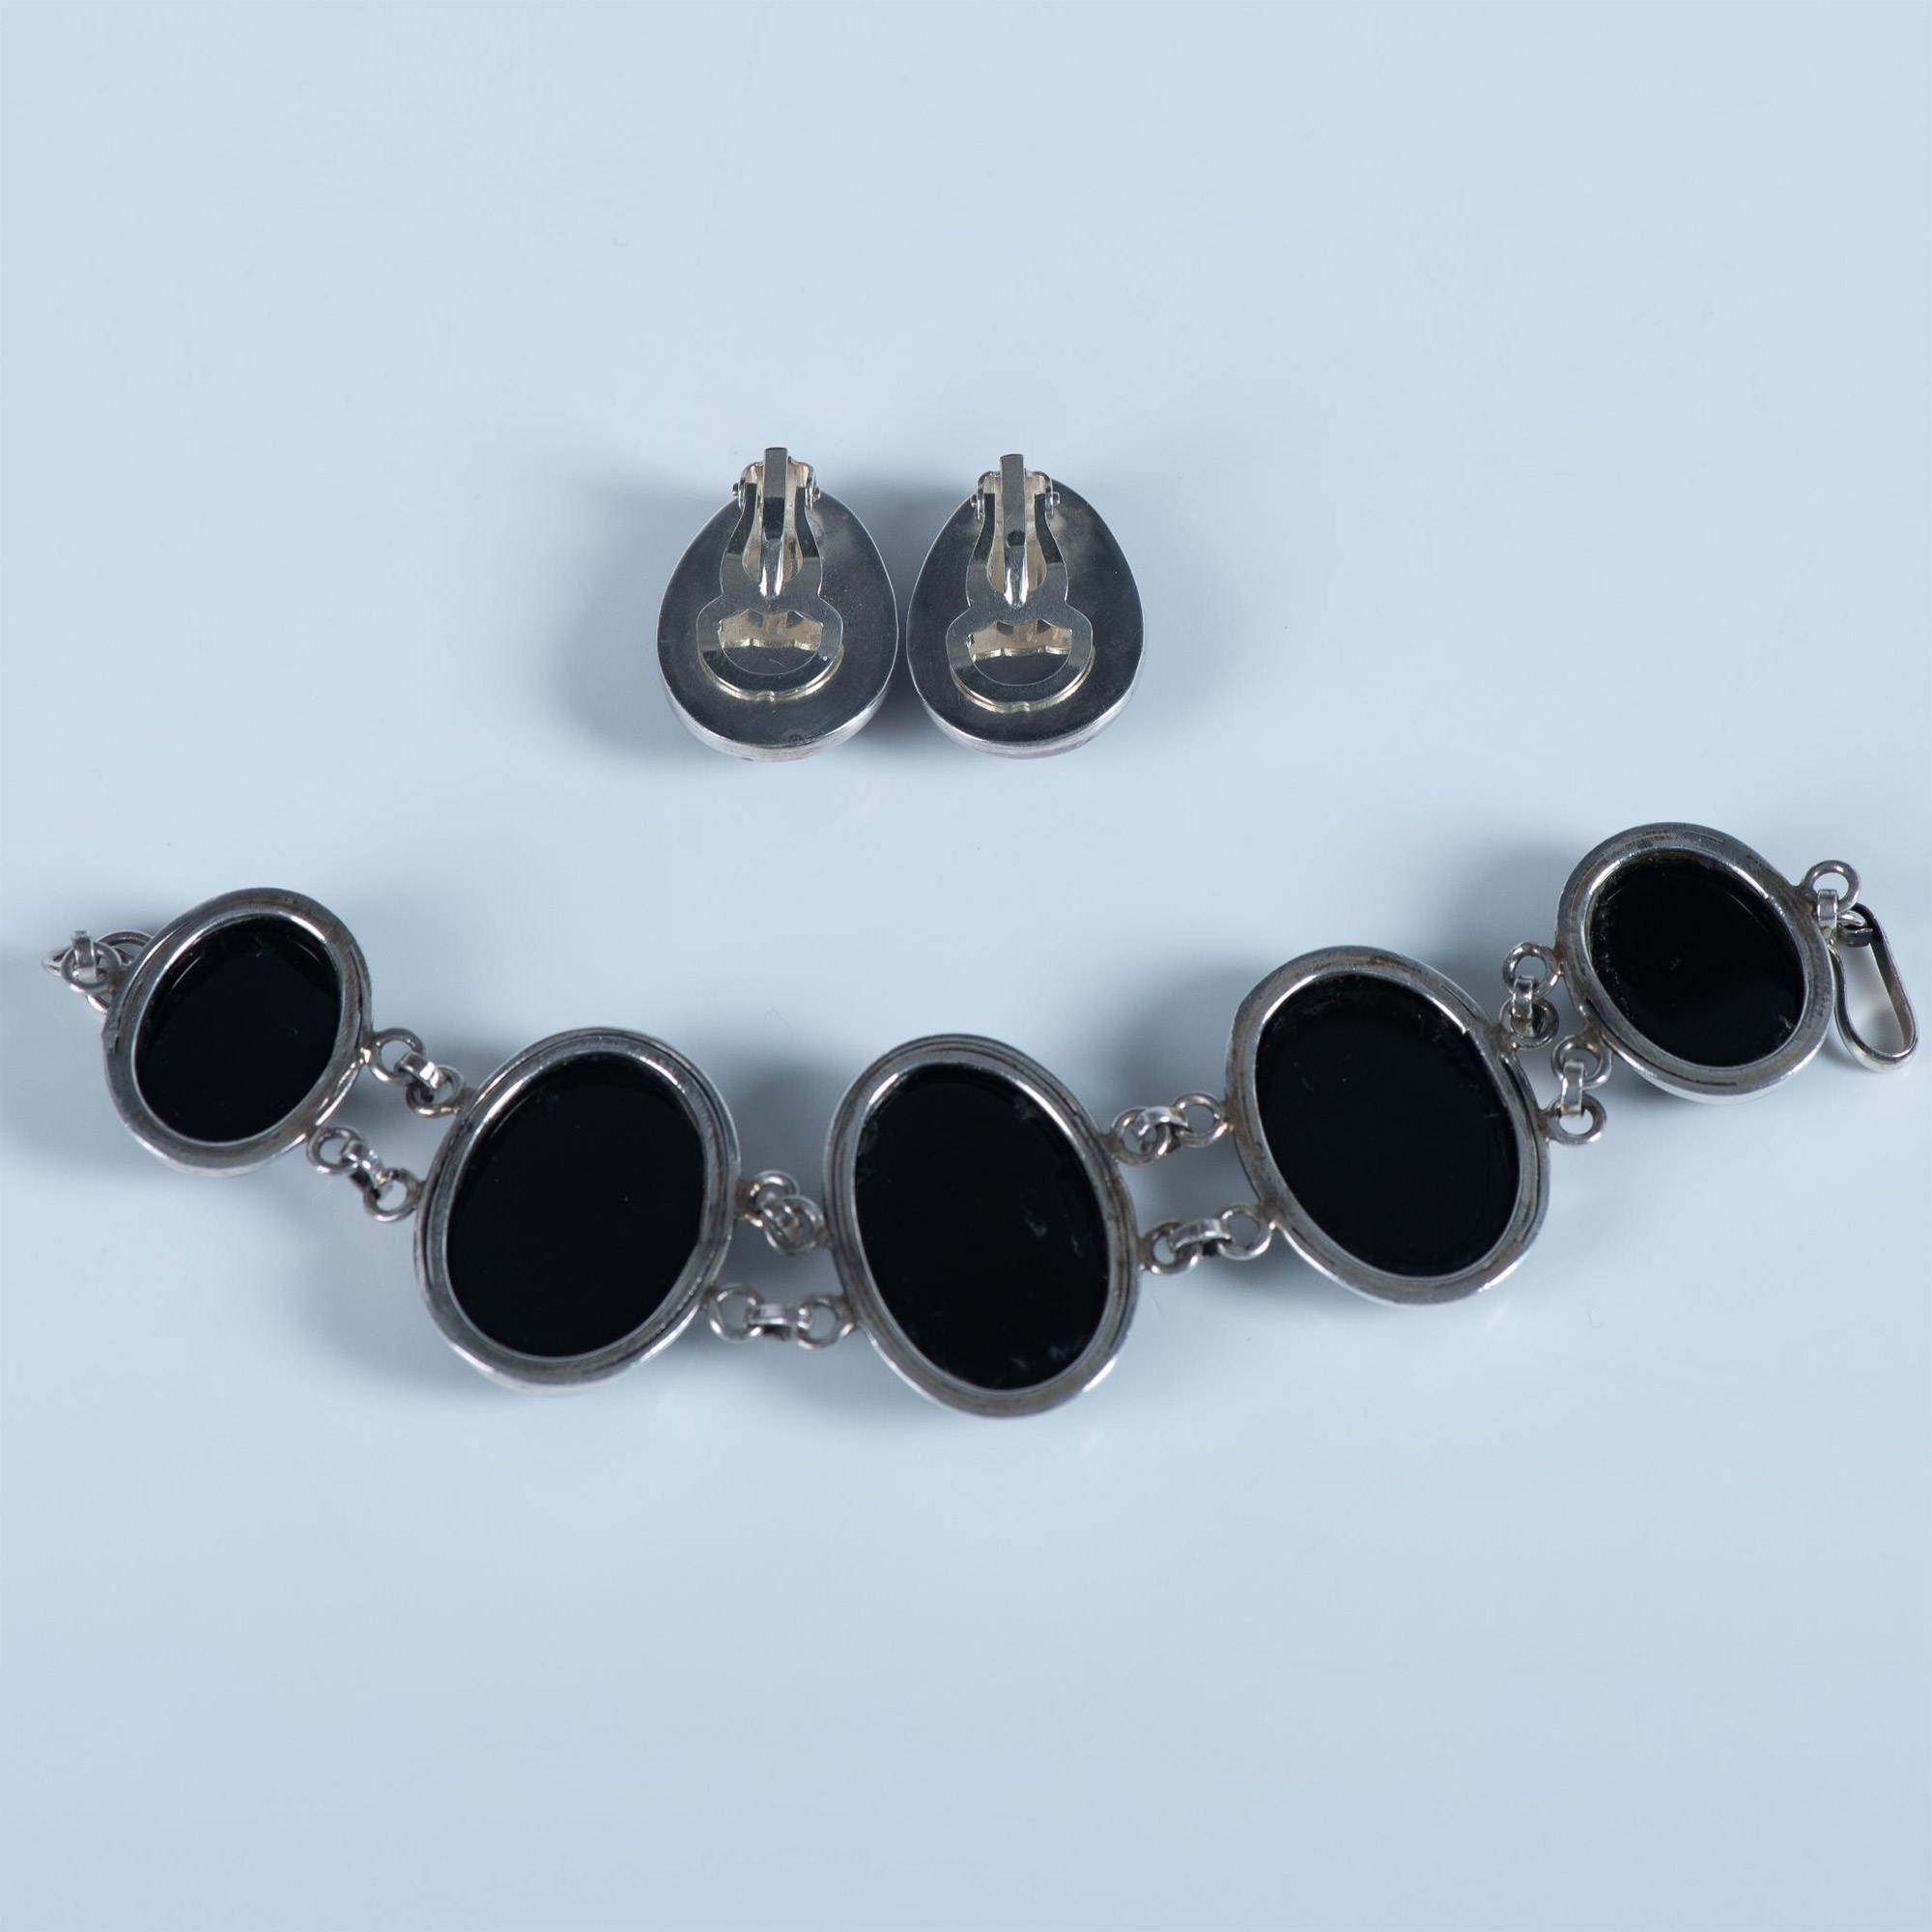 2pc Sterling Silver and Dark Amber Bracelet and Earrings - Image 2 of 4